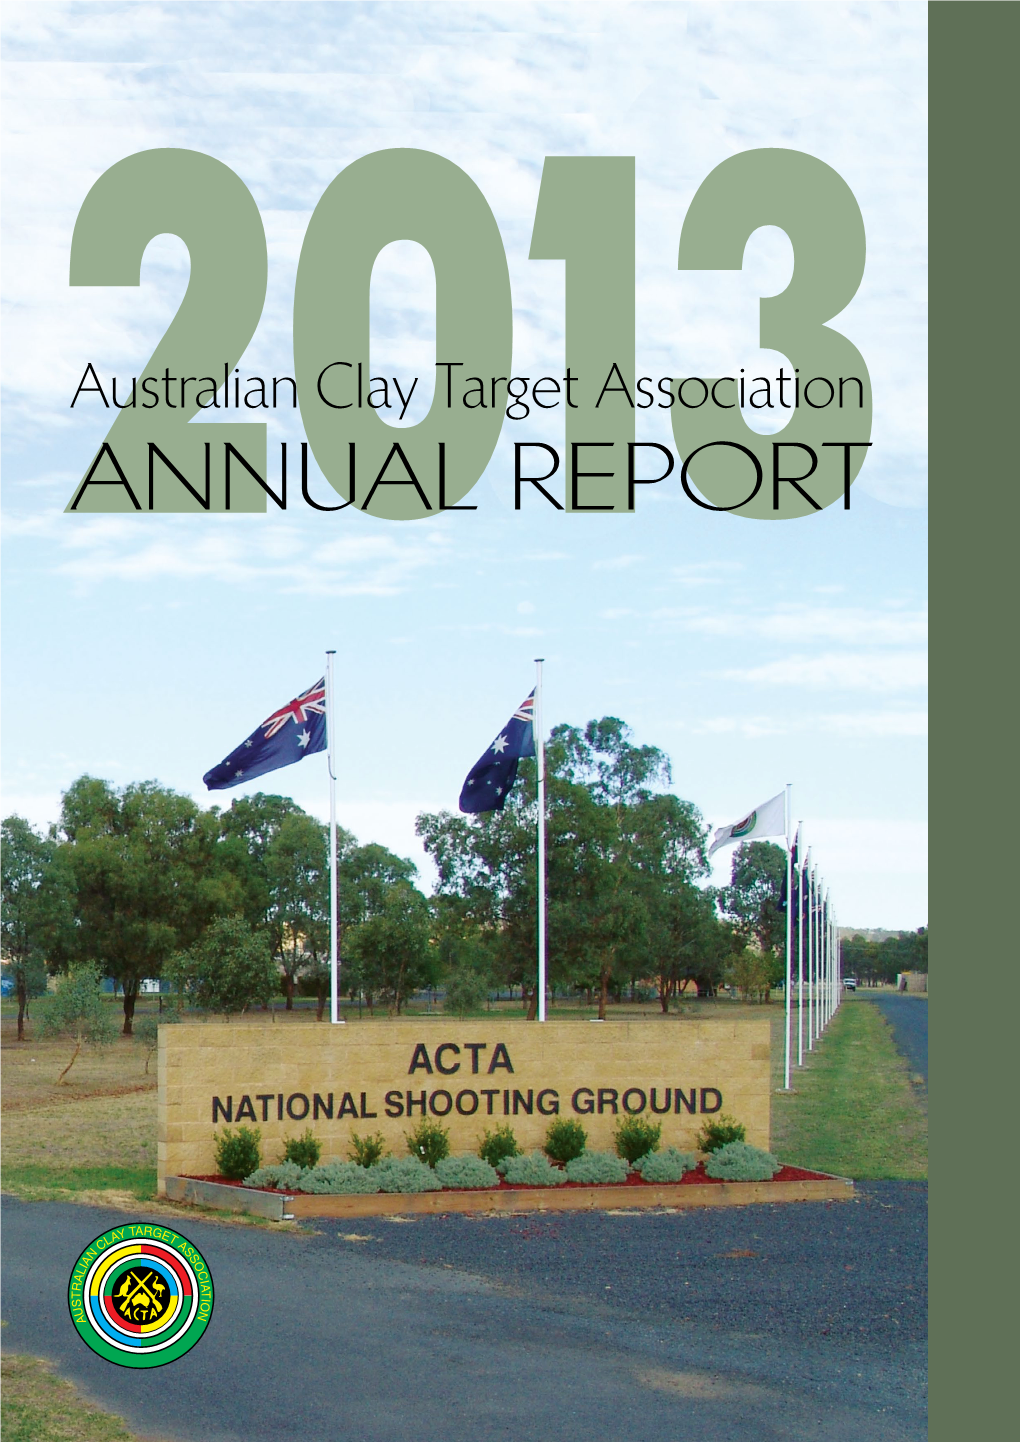 Annual Report Hall of Fame 2013